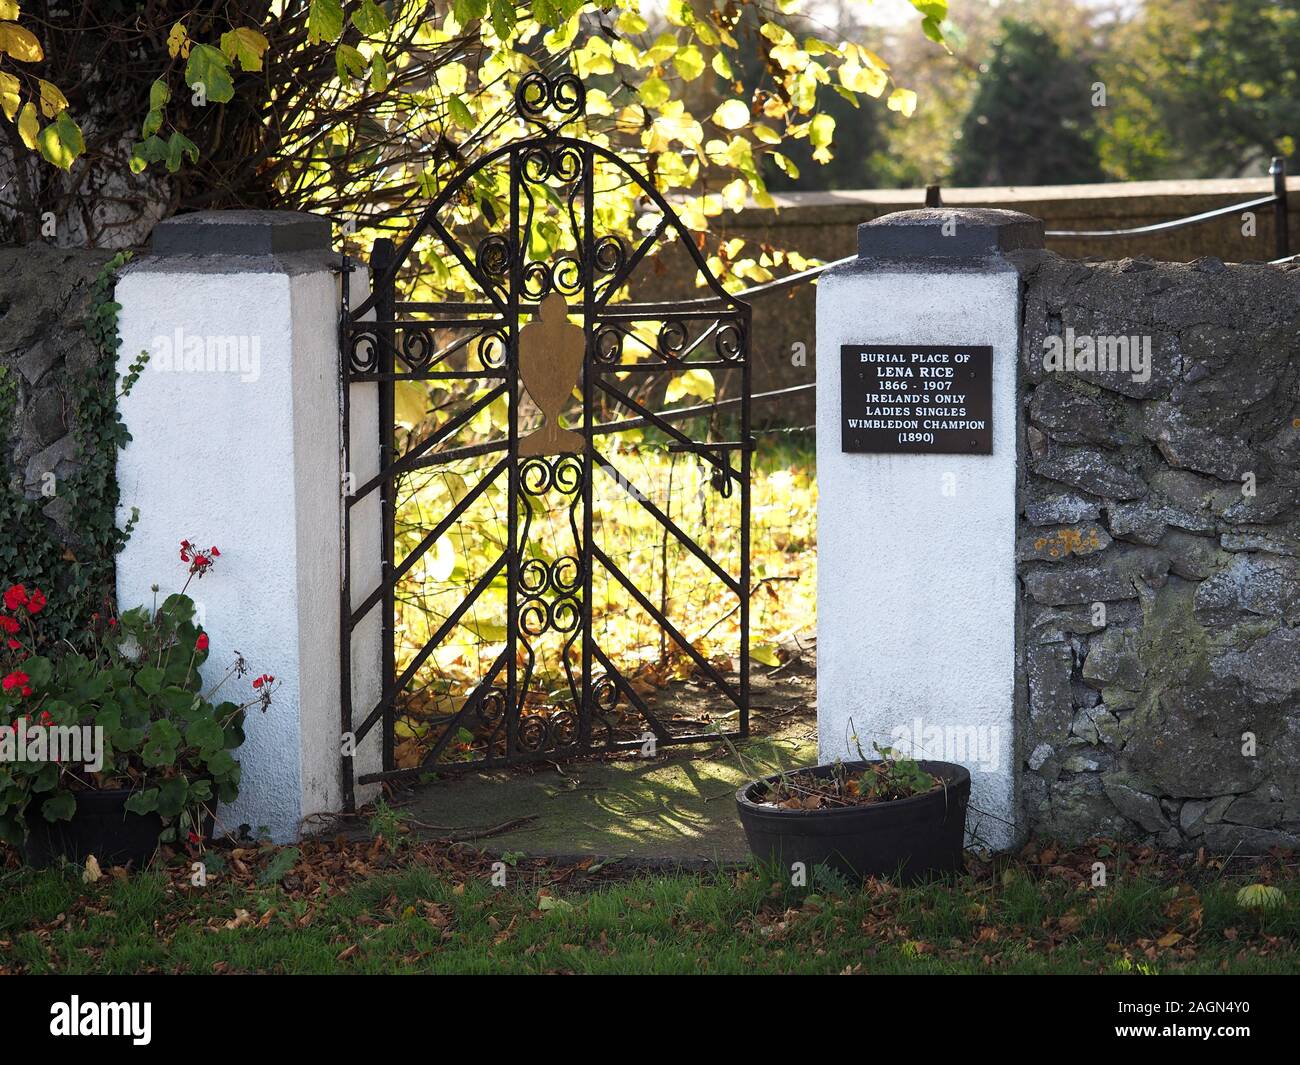 Burial place of Lena Rice, Irelands only Ladies singles Wimbledon Champion. New Inn, Tipperary, Ireland Stock Photo